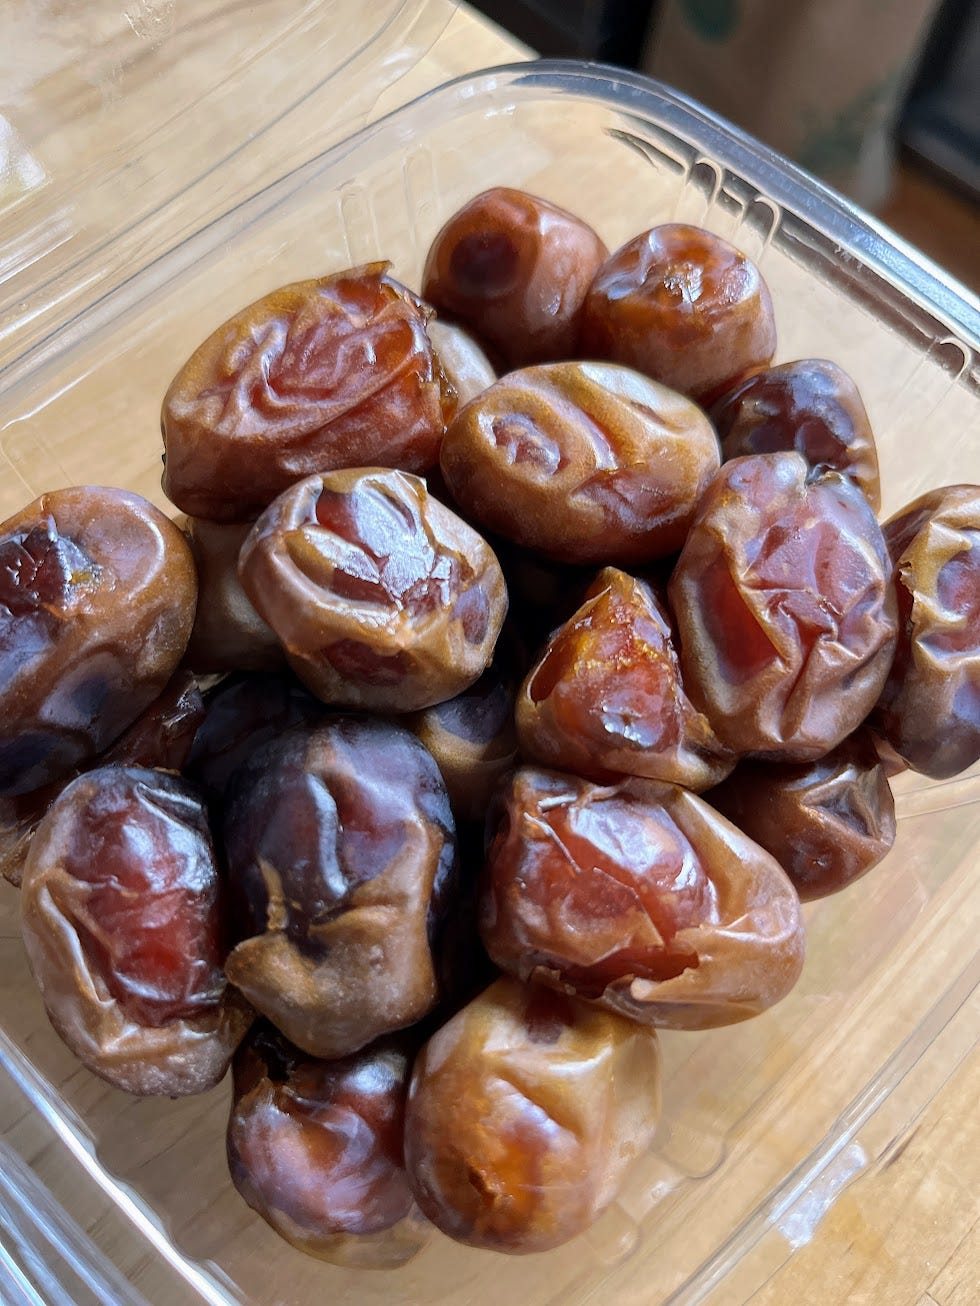 Open container of Barhi dates